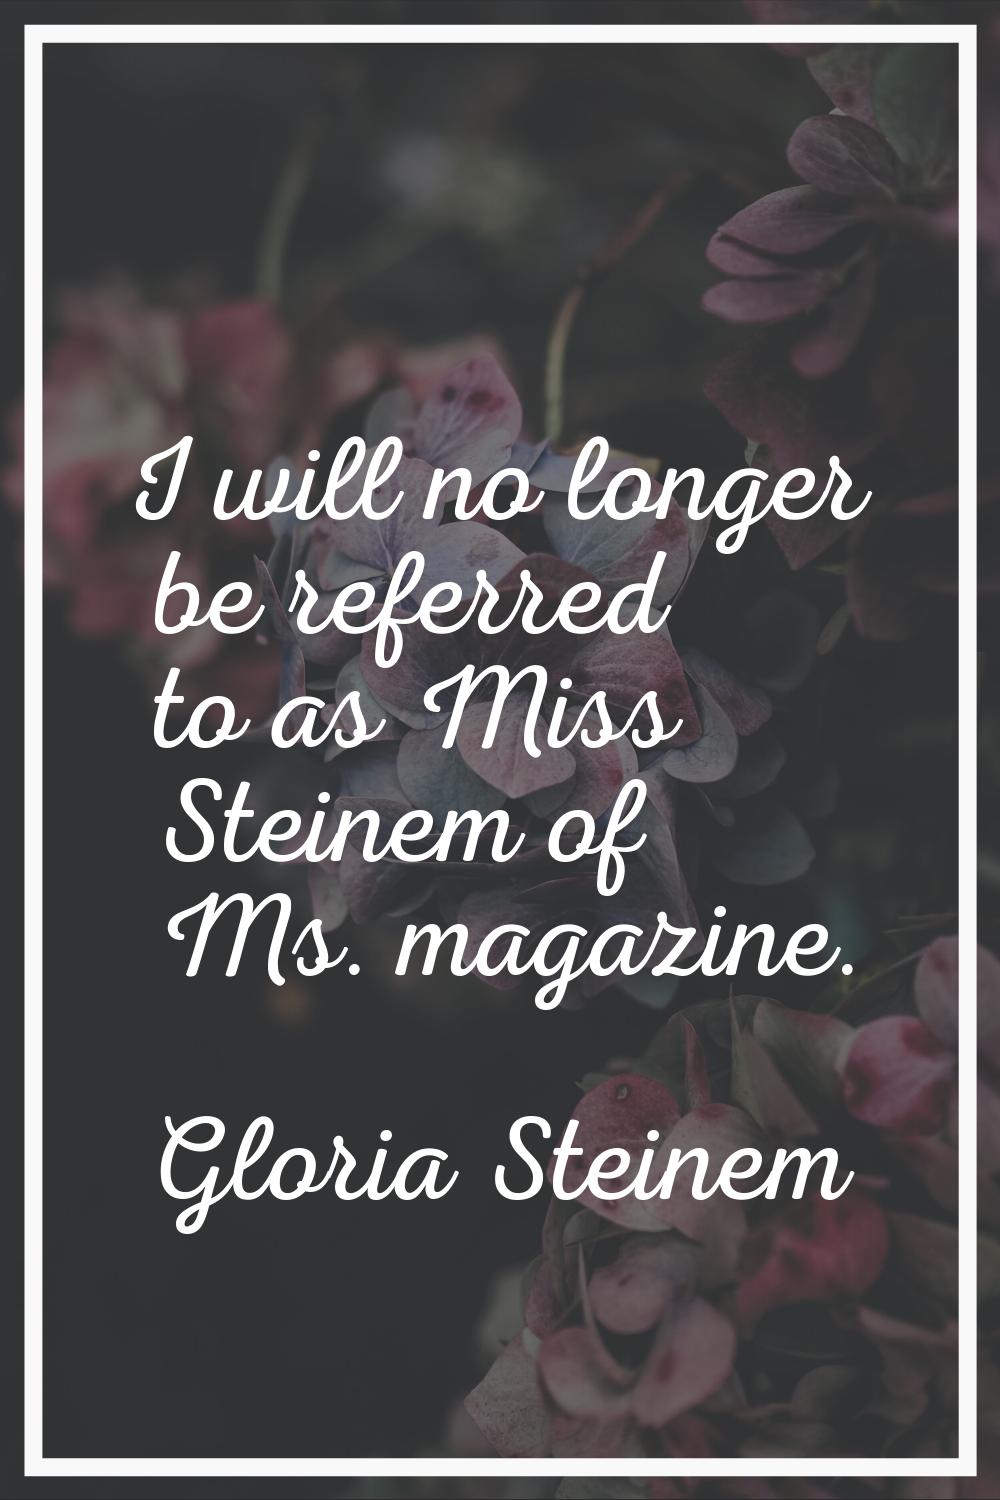 I will no longer be referred to as Miss Steinem of Ms. magazine.